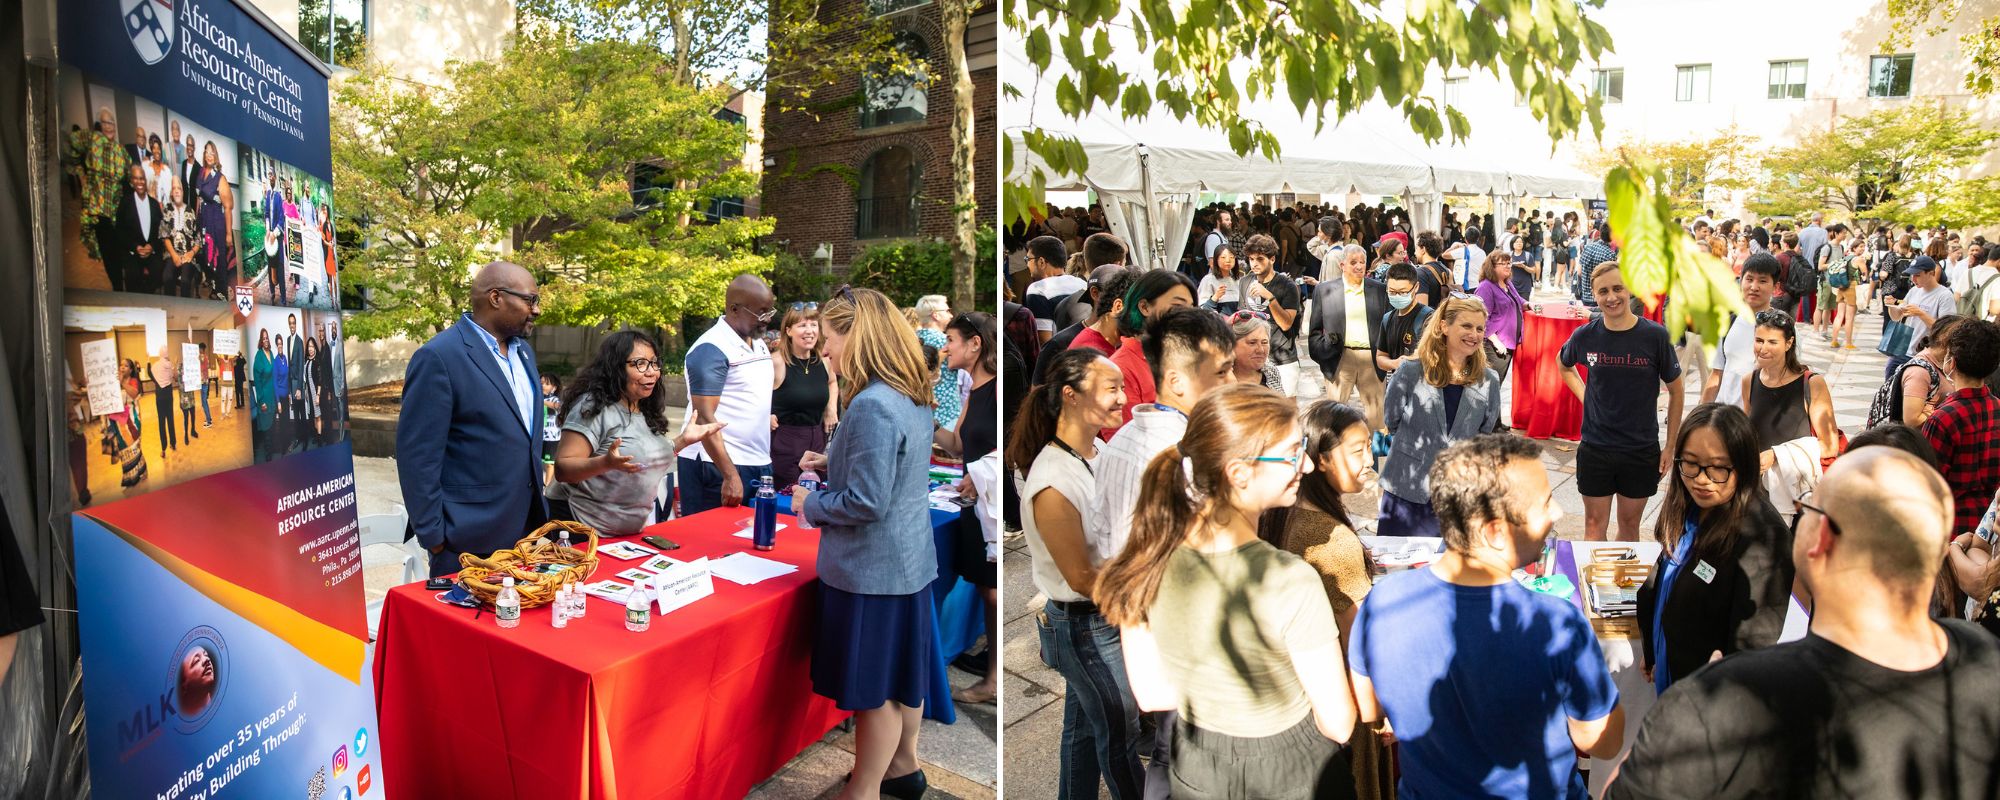 Left: Penn President Liz Magill speaks with people from the African American Resource Center at a table outside; right: a large crowd of people outside, including Liz Magill.